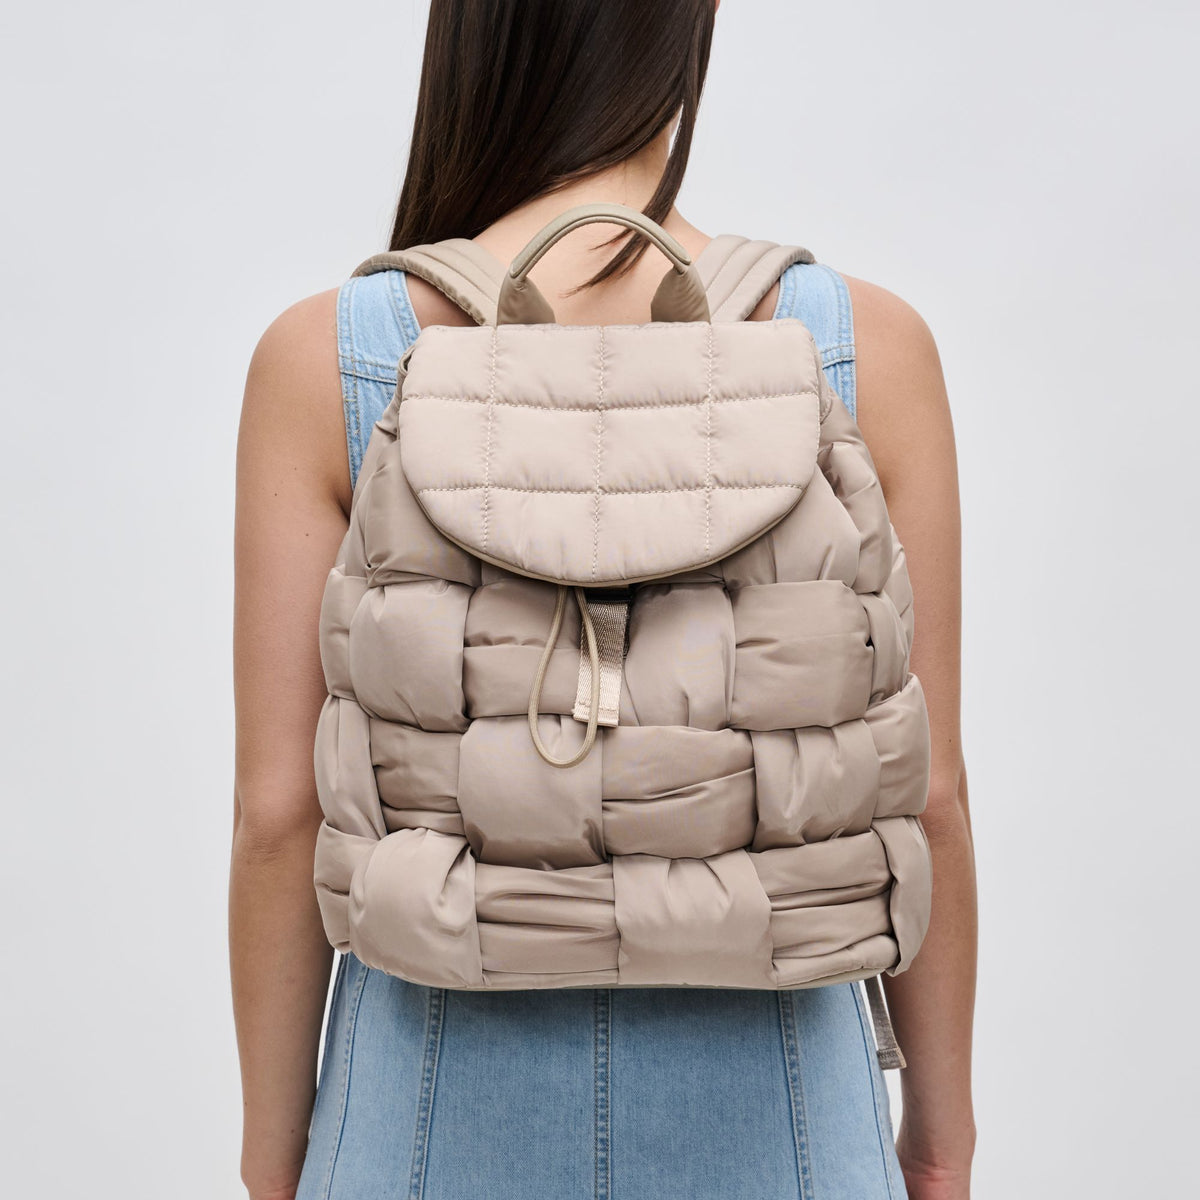 Woman wearing Nude Sol and Selene Perception Backpack 841764107747 View 1 | Nude